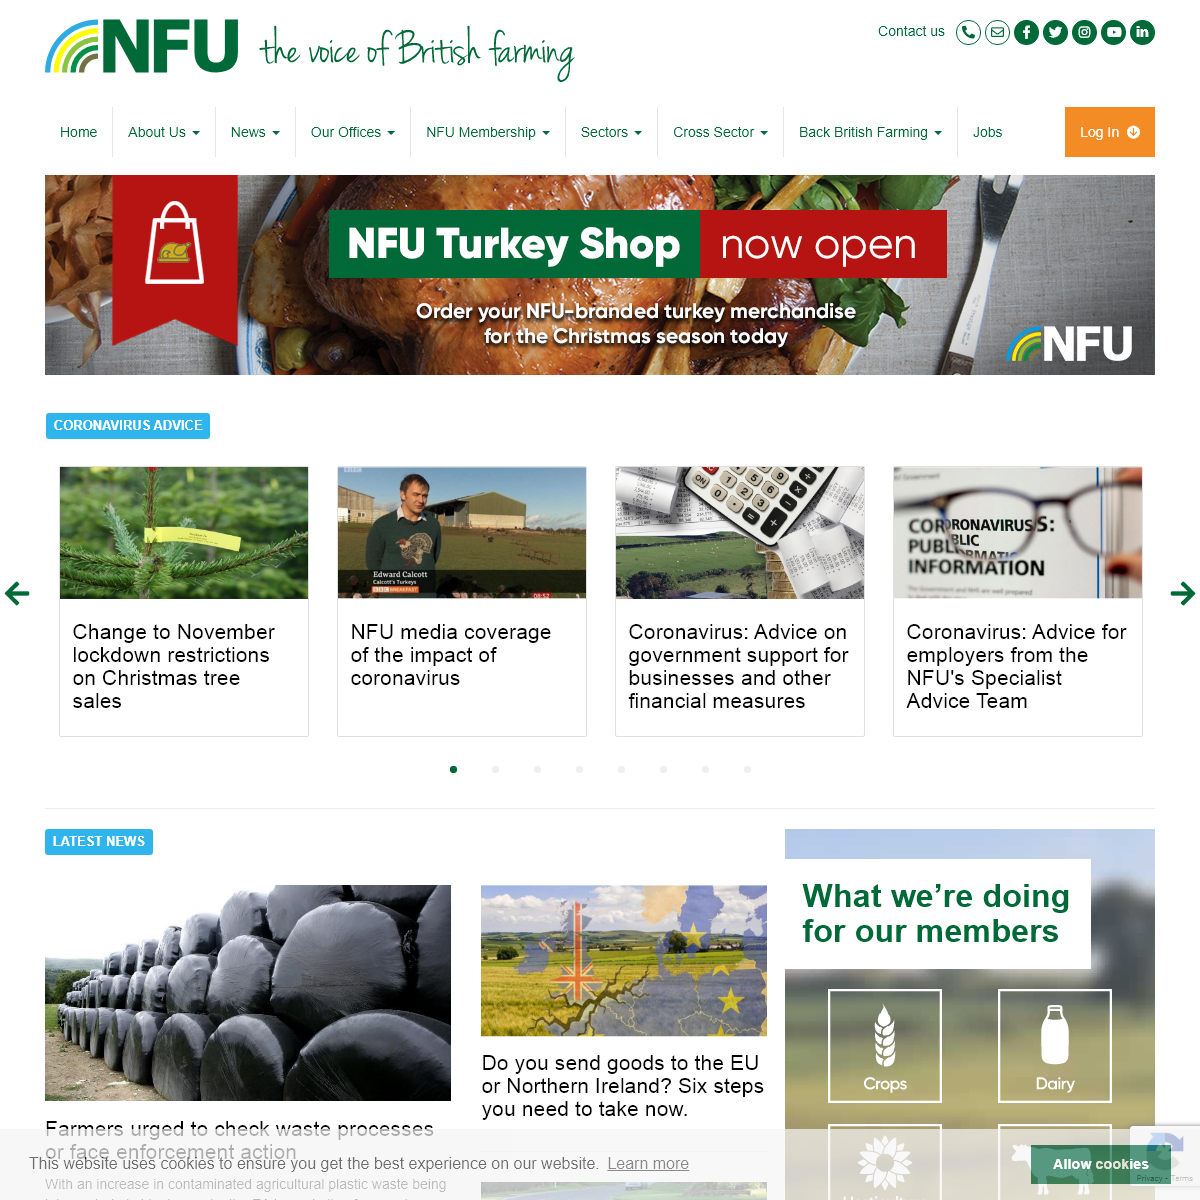 A complete backup of nfuonline.com